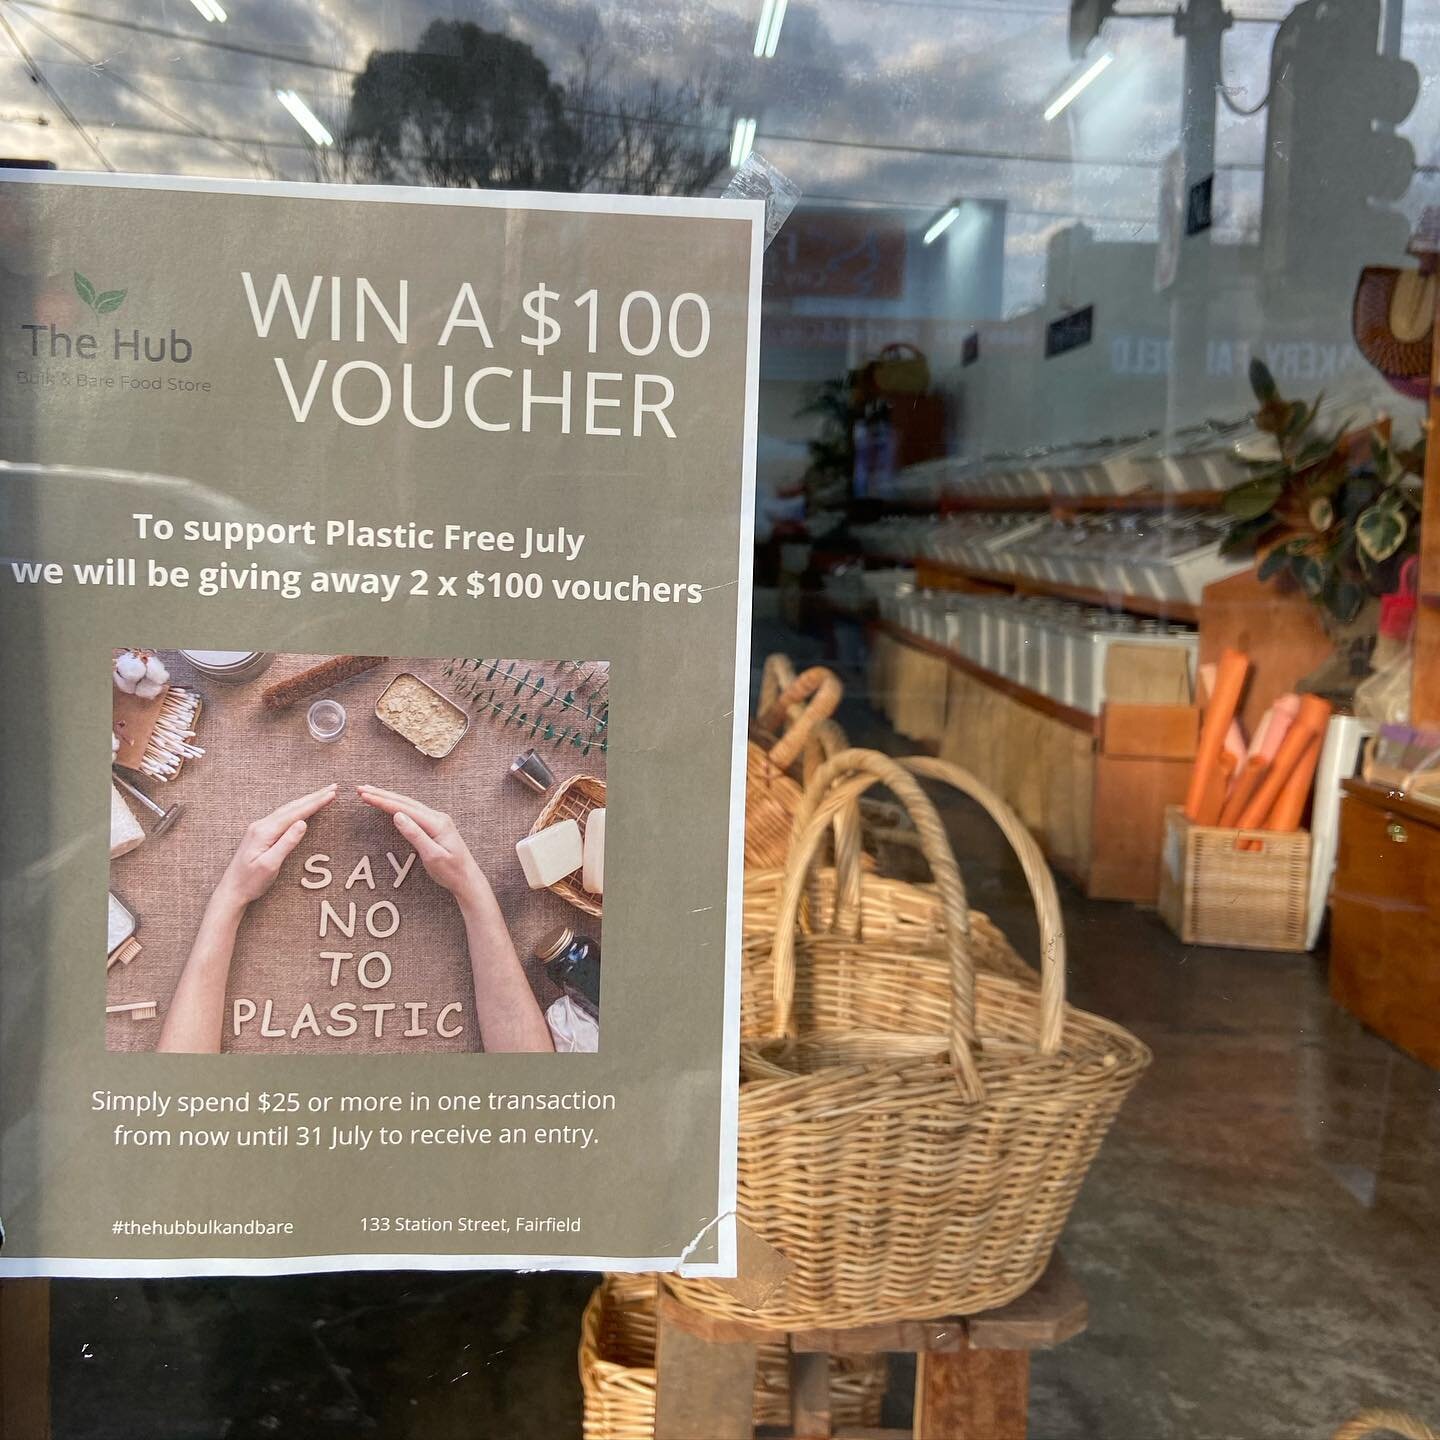 Have you heard about our Plastic Free July competition? 

#thehubbulkandbare #thehubfairfield #bulkfoodstore #bulkfoodstoremelbourne #bulkfoodmelbourne #plasticfreeshopping #plasticfreejuly